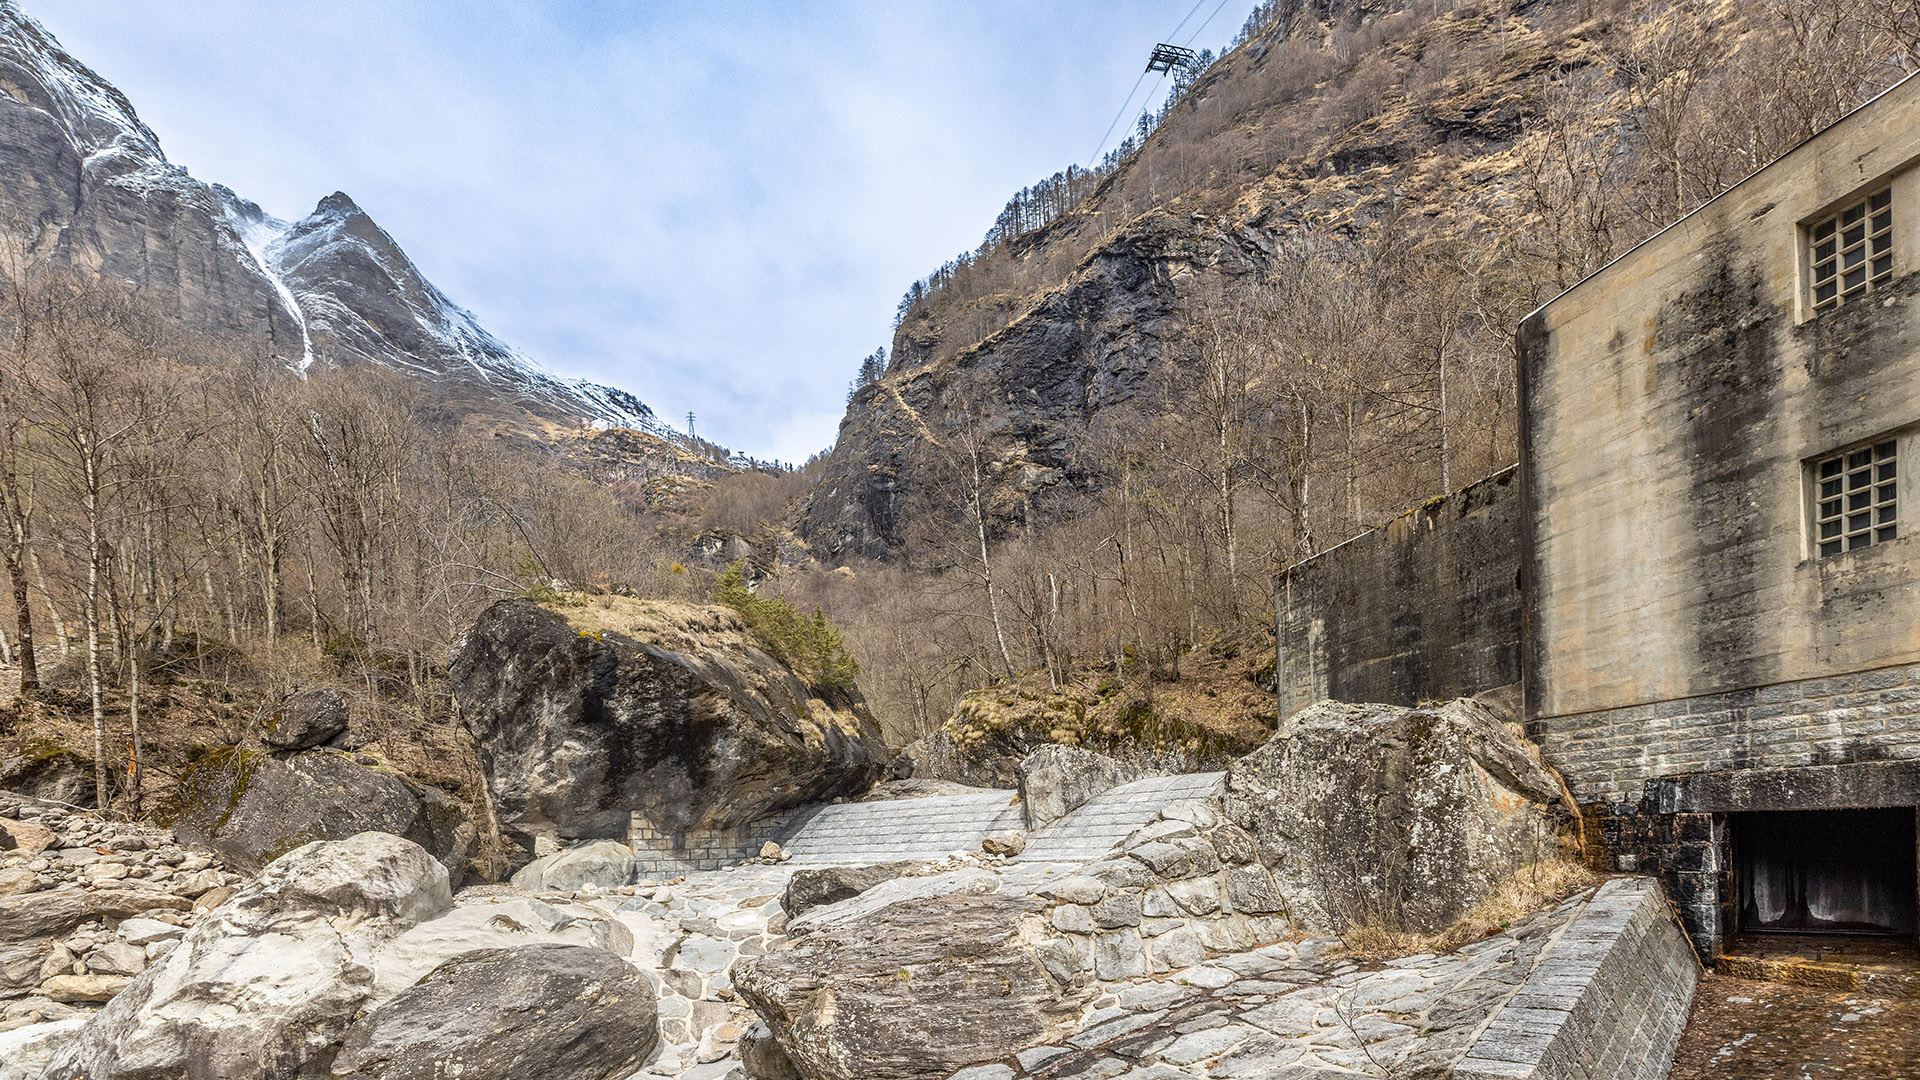 Photograph showing part of a hydropower plant as well as the top of a mountain creek in the Alps with little discharge, a typical situation when water is withheld in the hydropower plant.